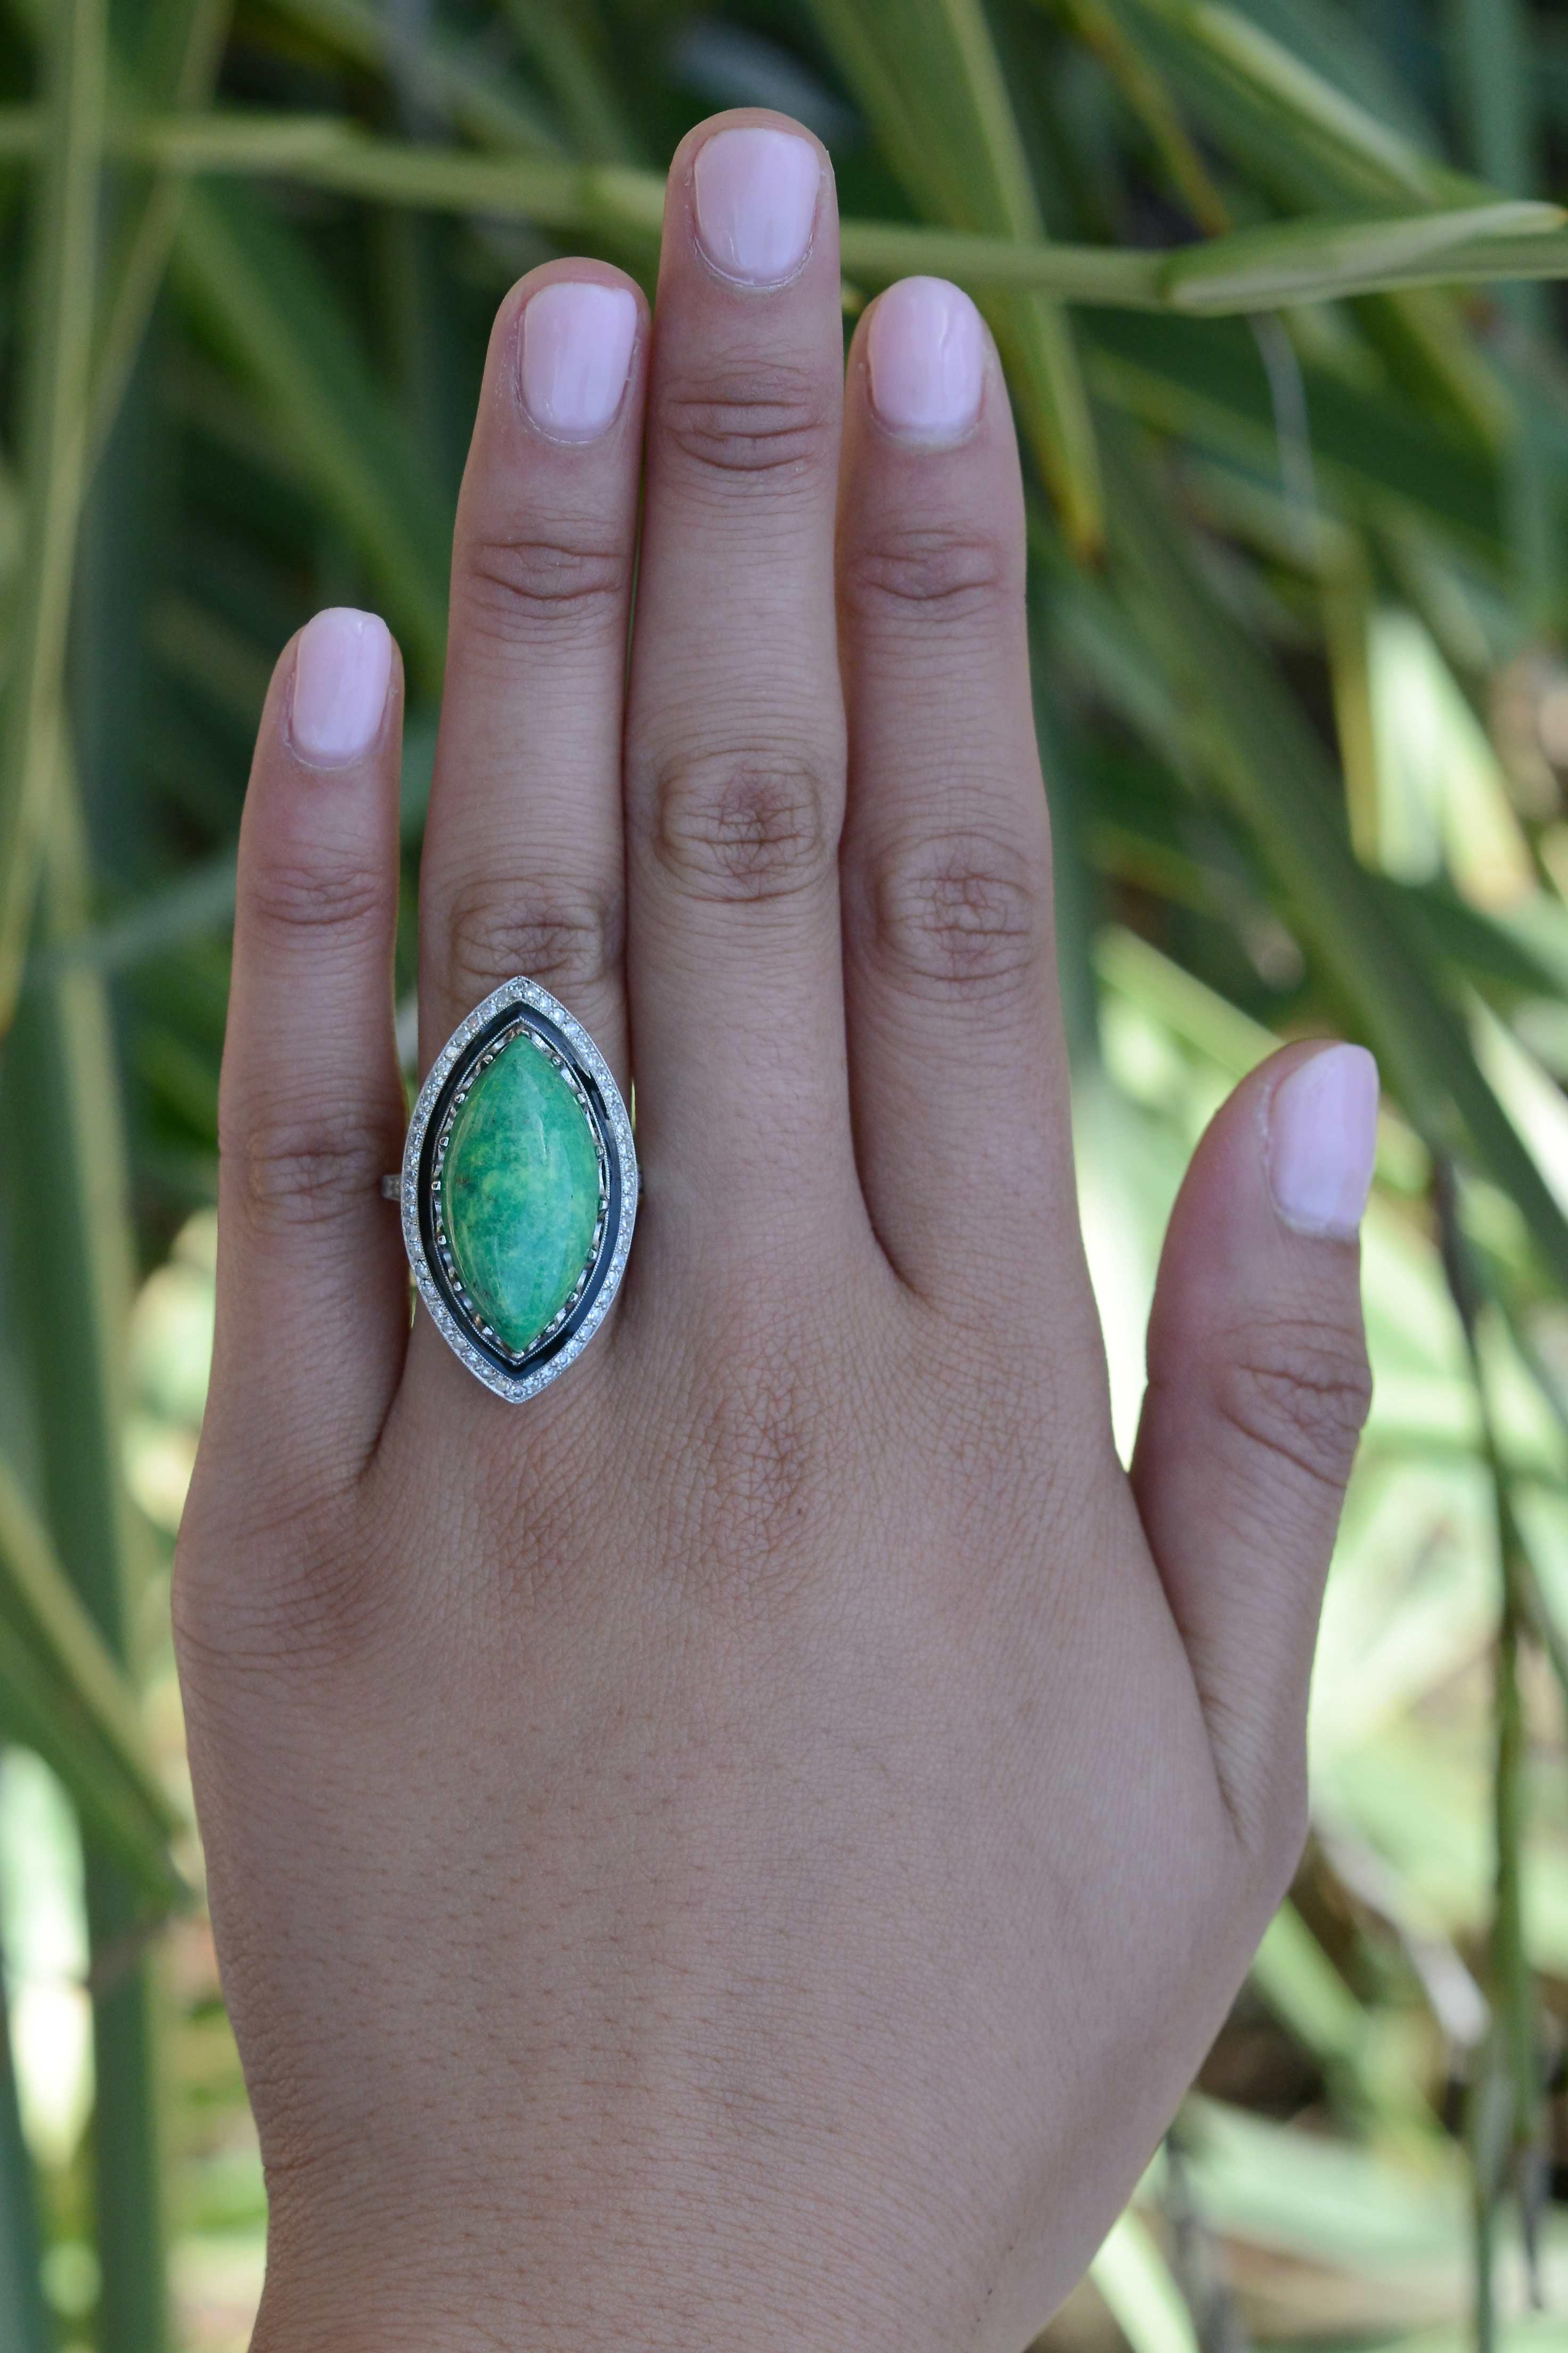 An elongated Art Deco inspired cocktail ring with a 27.86 carat, deeply saturated gem-quality green turquoise. The marquise-shaped cabochon cut is a most unique, elongated gemstone and is surrounded by a black enamel and diamond border. Entirely